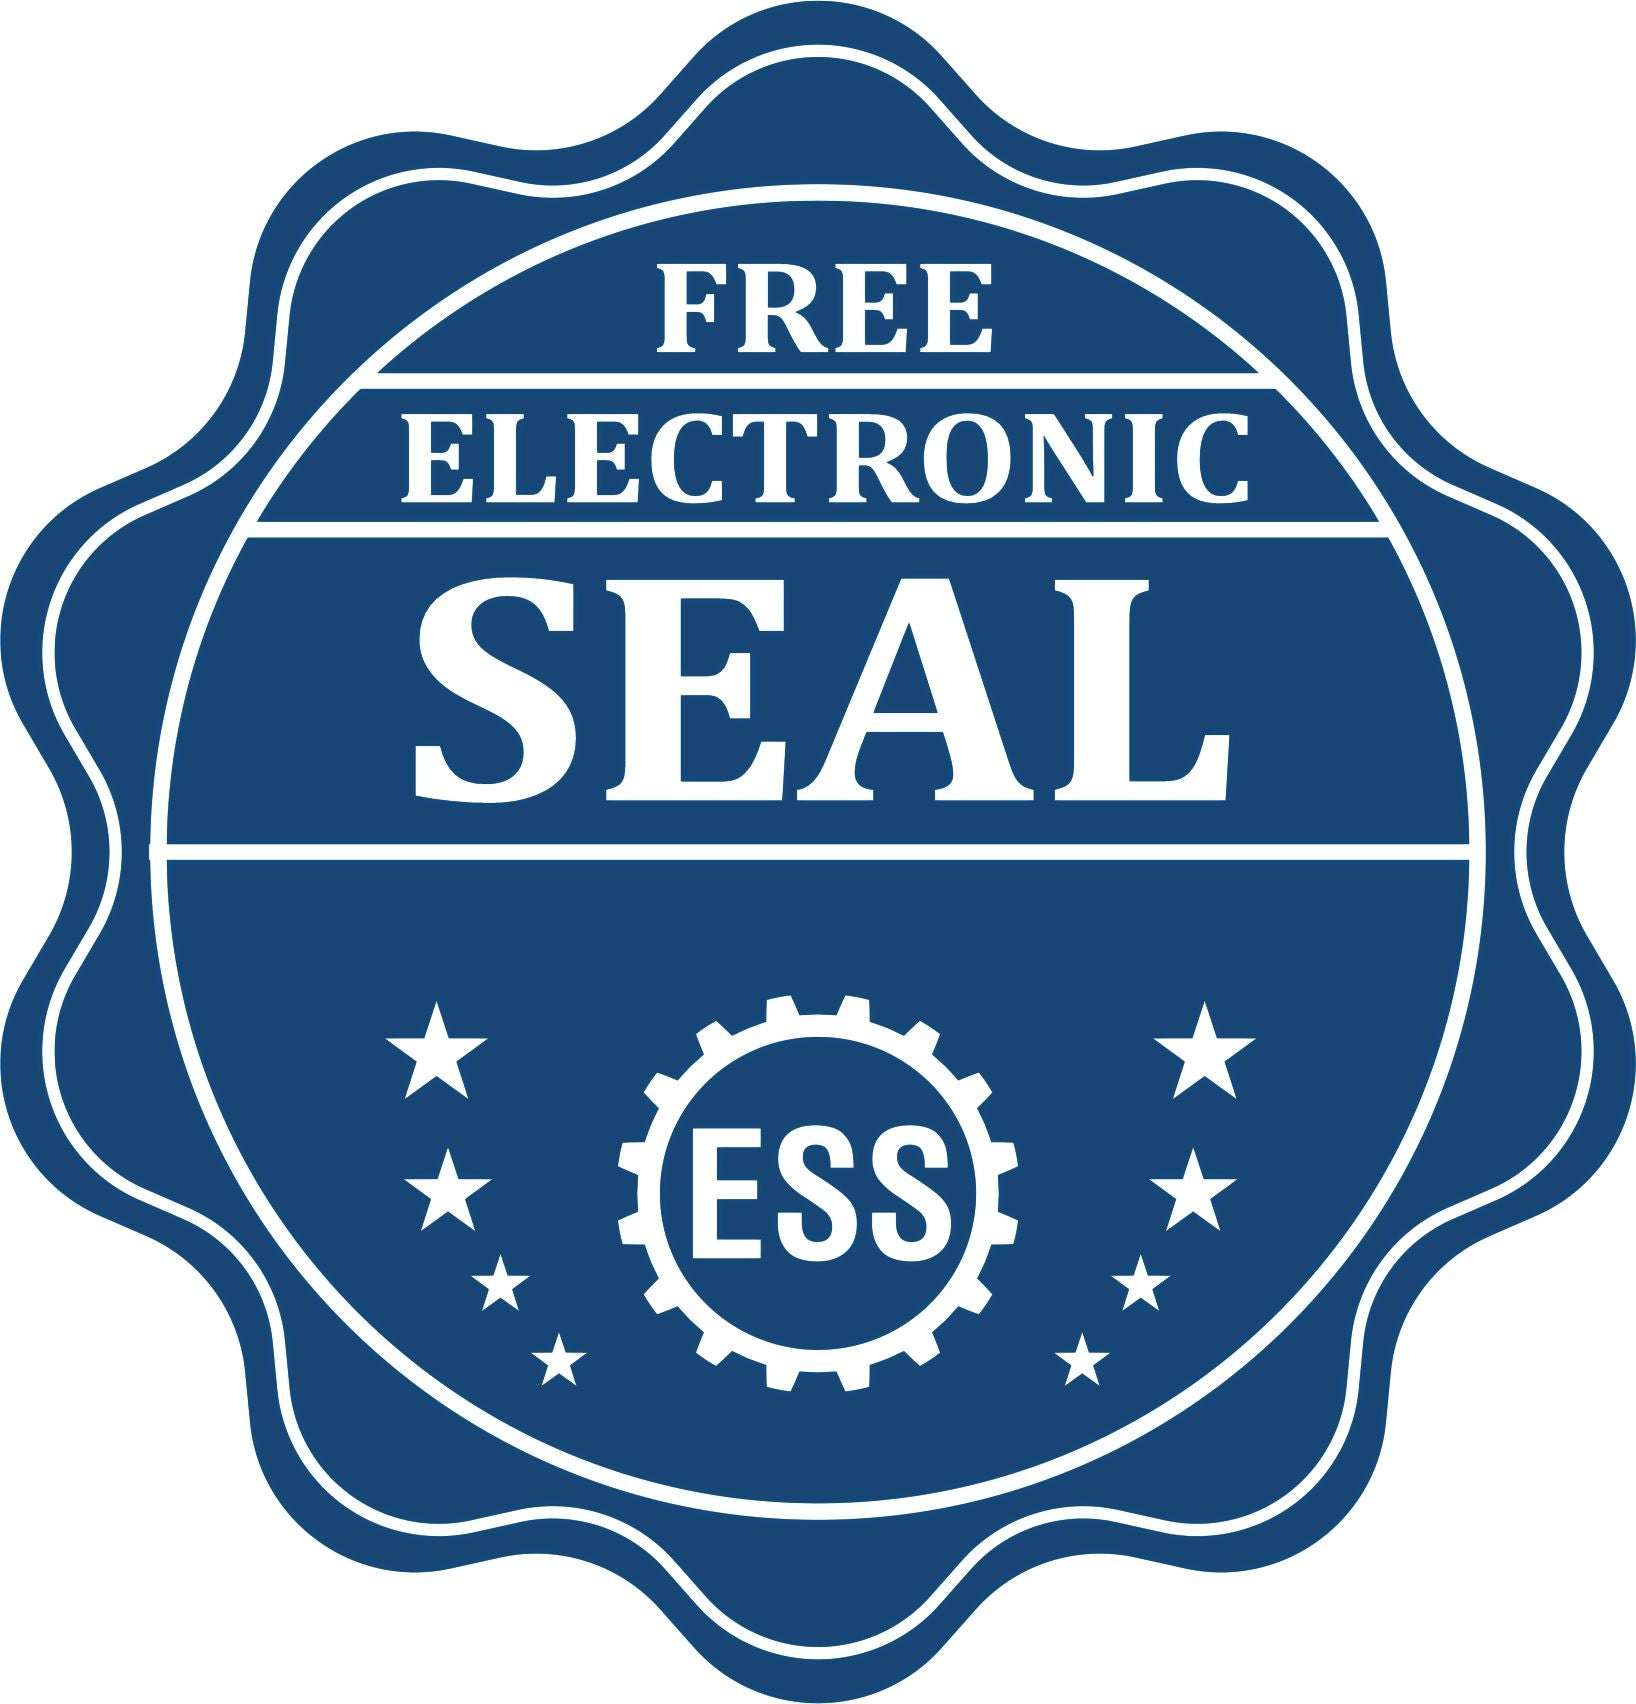 A badge showing a free electronic seal for the Gift North Carolina Architect Seal with stars and the ESS gear on the emblem.